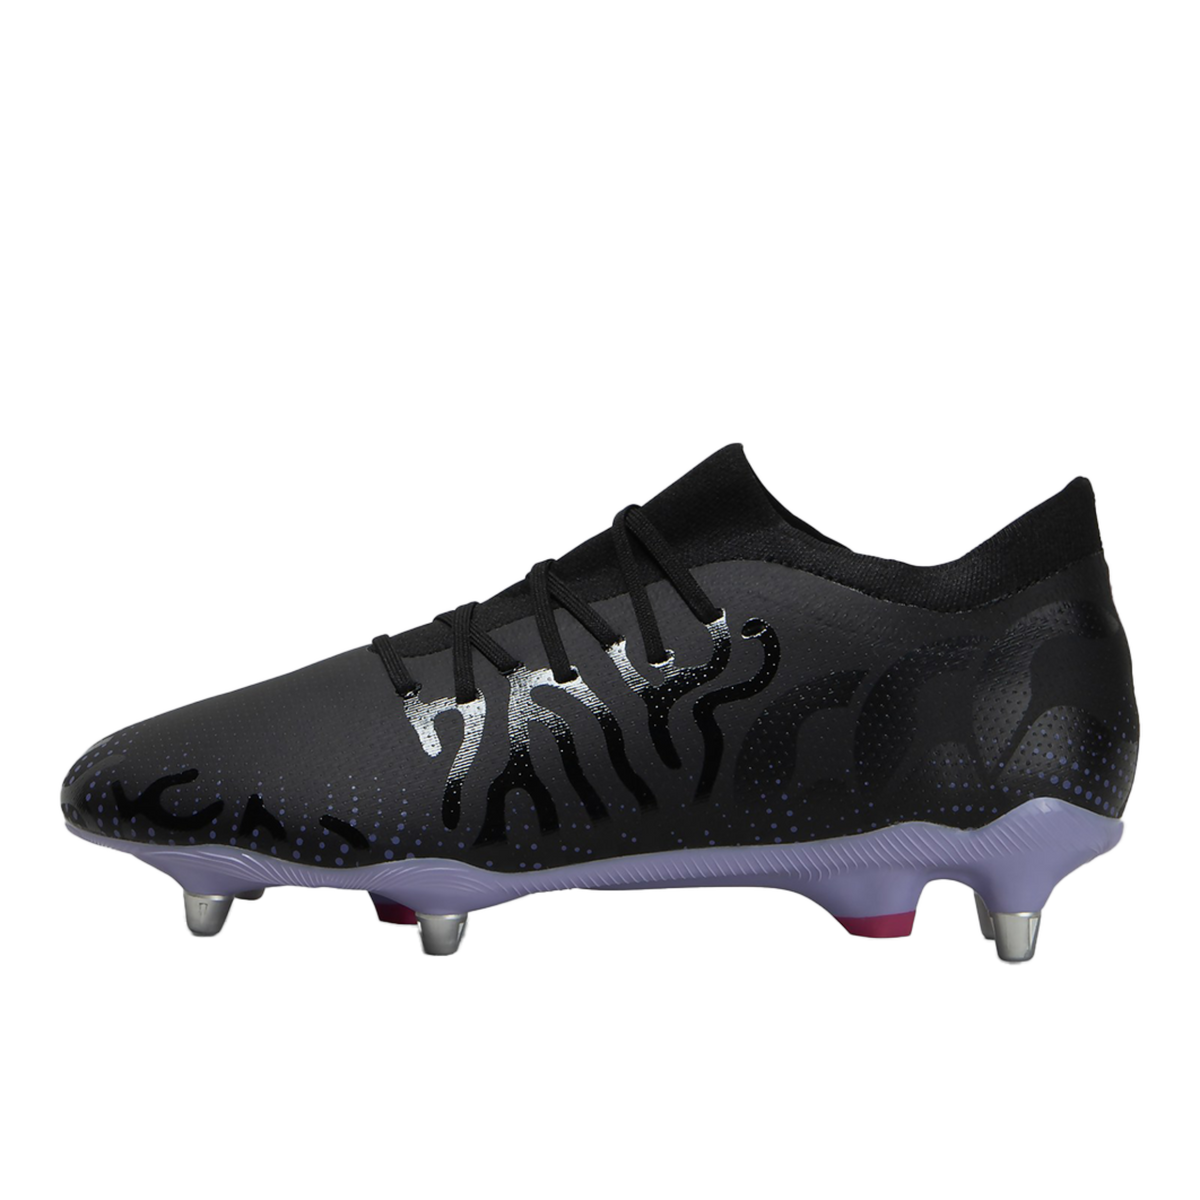 Canterbury Speed Infinite Pro SG Rugby Boots a High-Performance Durable CCC Rugby Cleat Black/Purple Available in Unisex Sizing 6-16